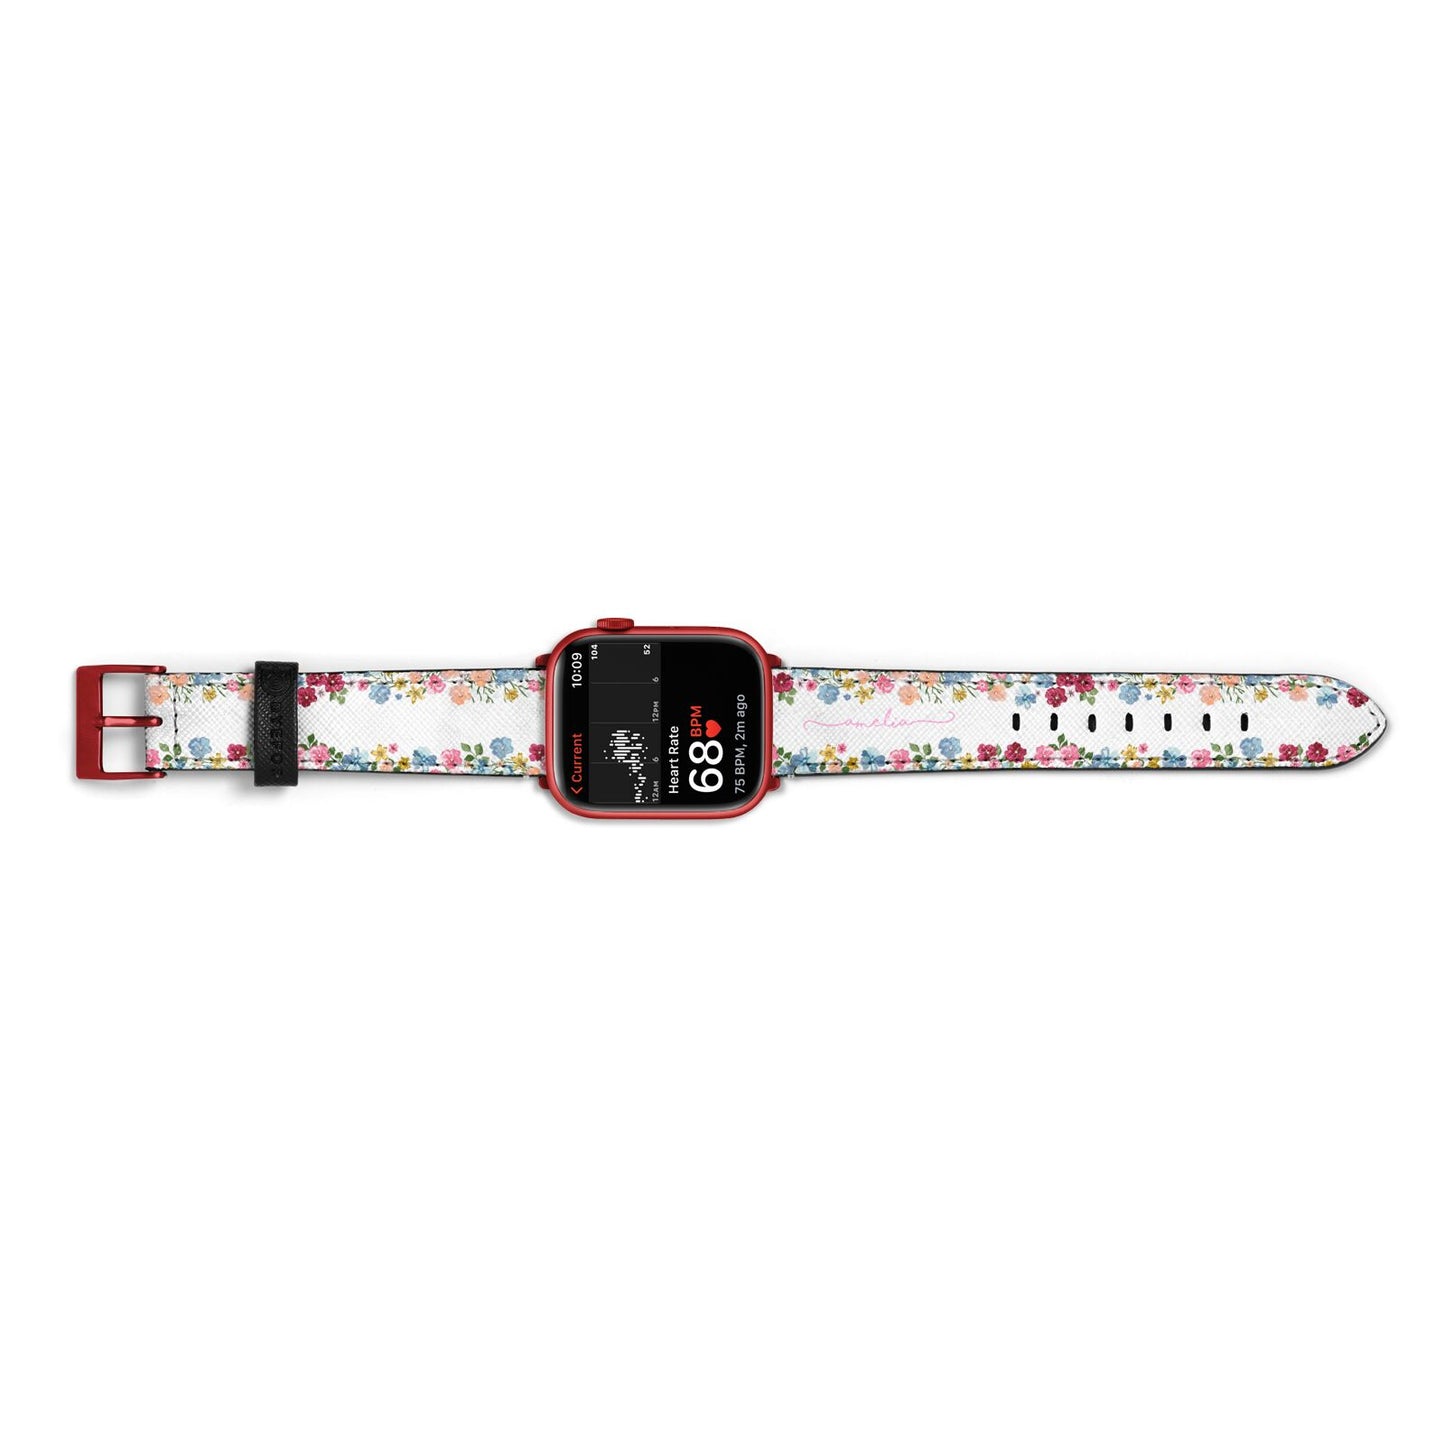 Personalised Floral Meadow Apple Watch Strap Size 38mm Landscape Image Red Hardware